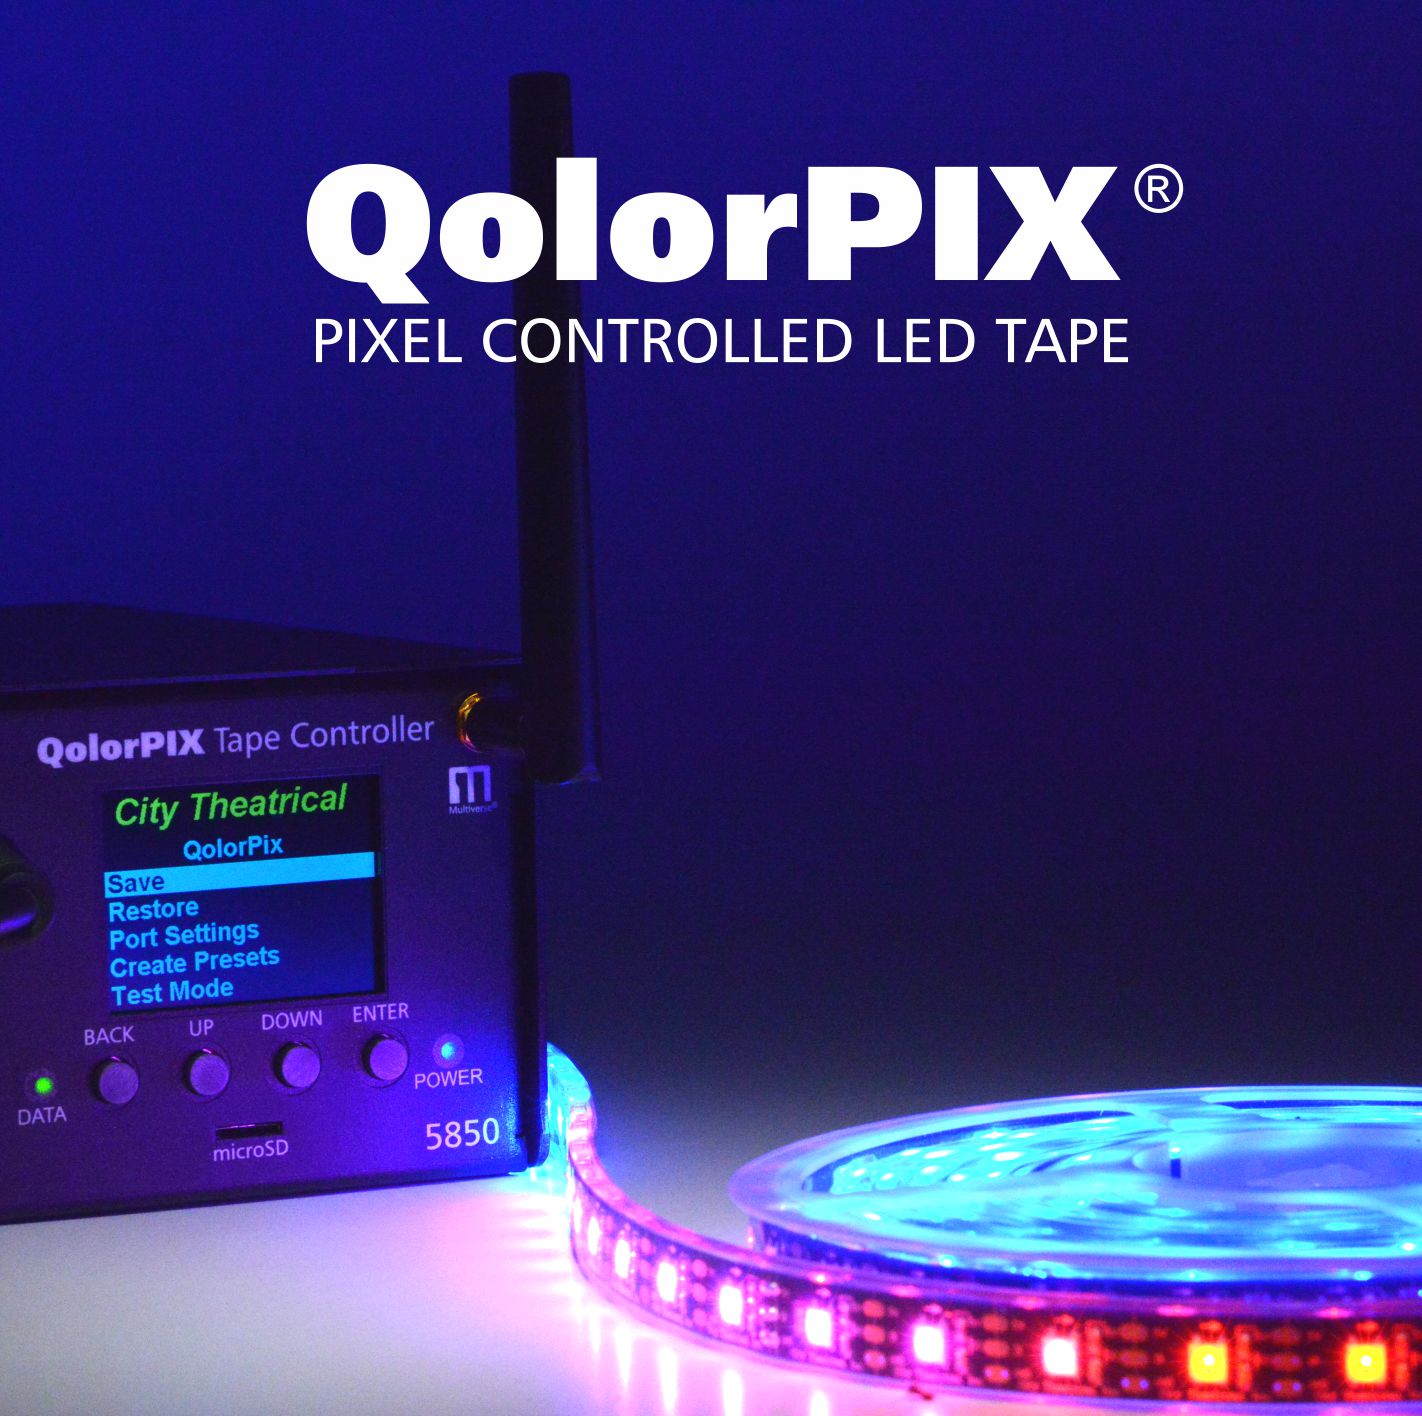 QolorPIX Pixel Controlled LED Tape & Tape Controller